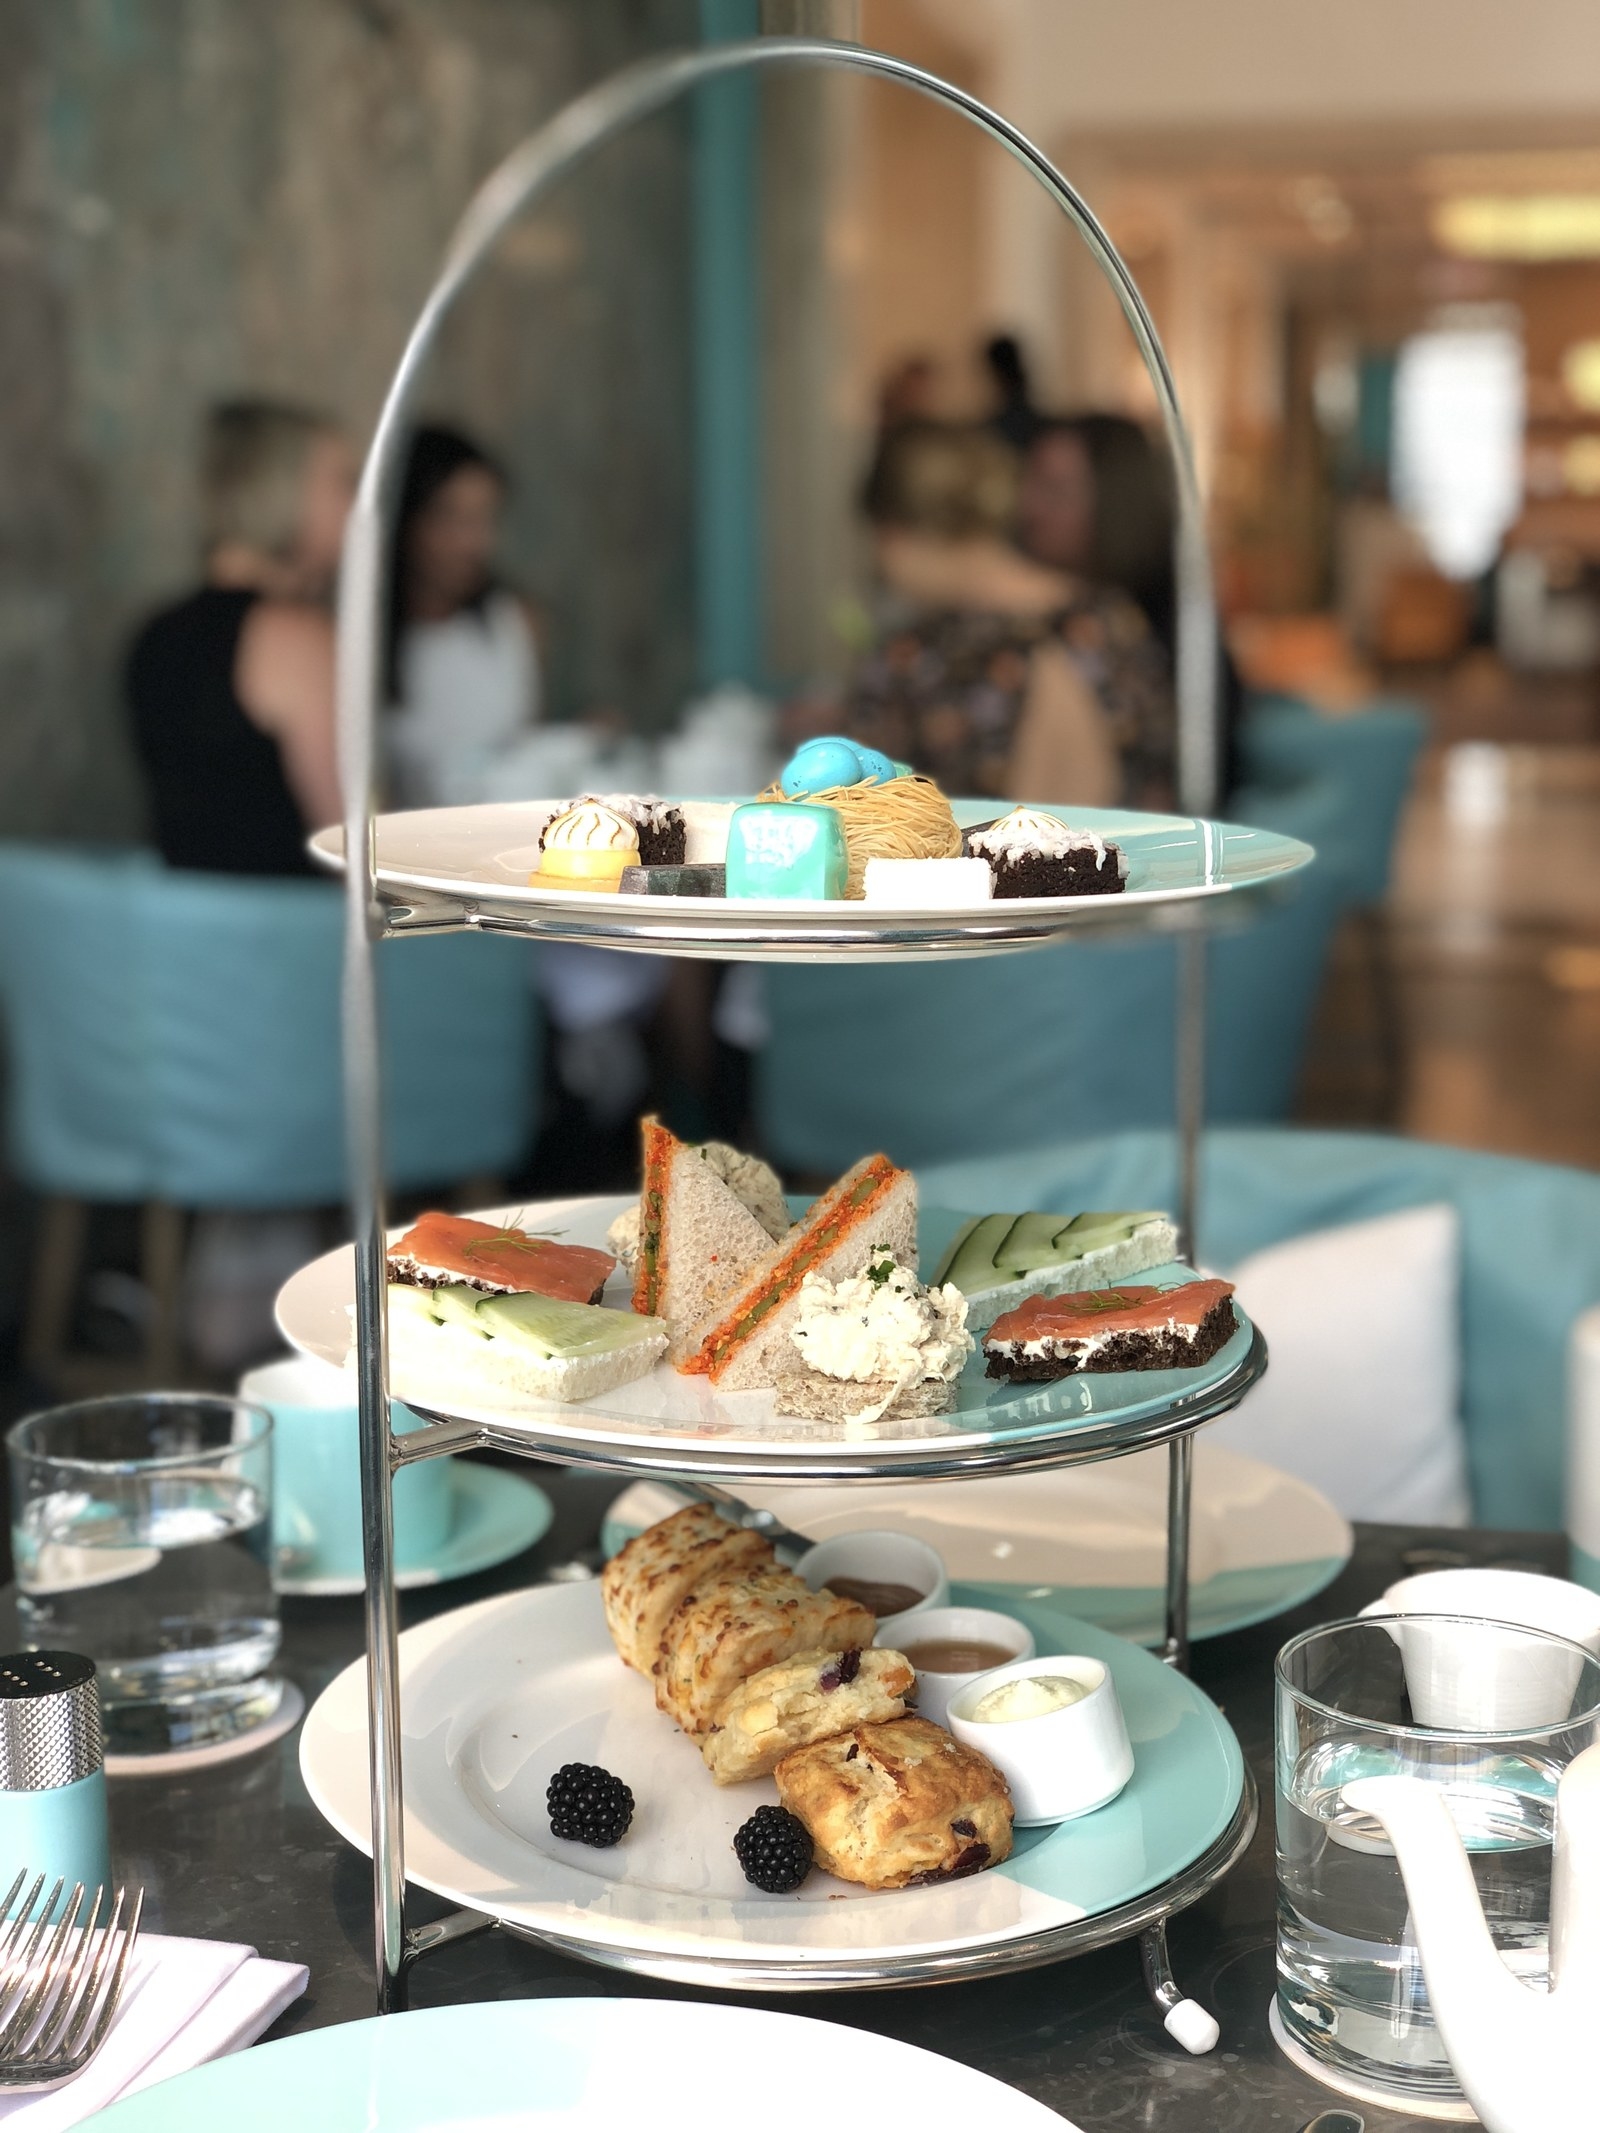 Breakfast At Tiffany's - A Blue Box Cafe Review - Stylishly Stella